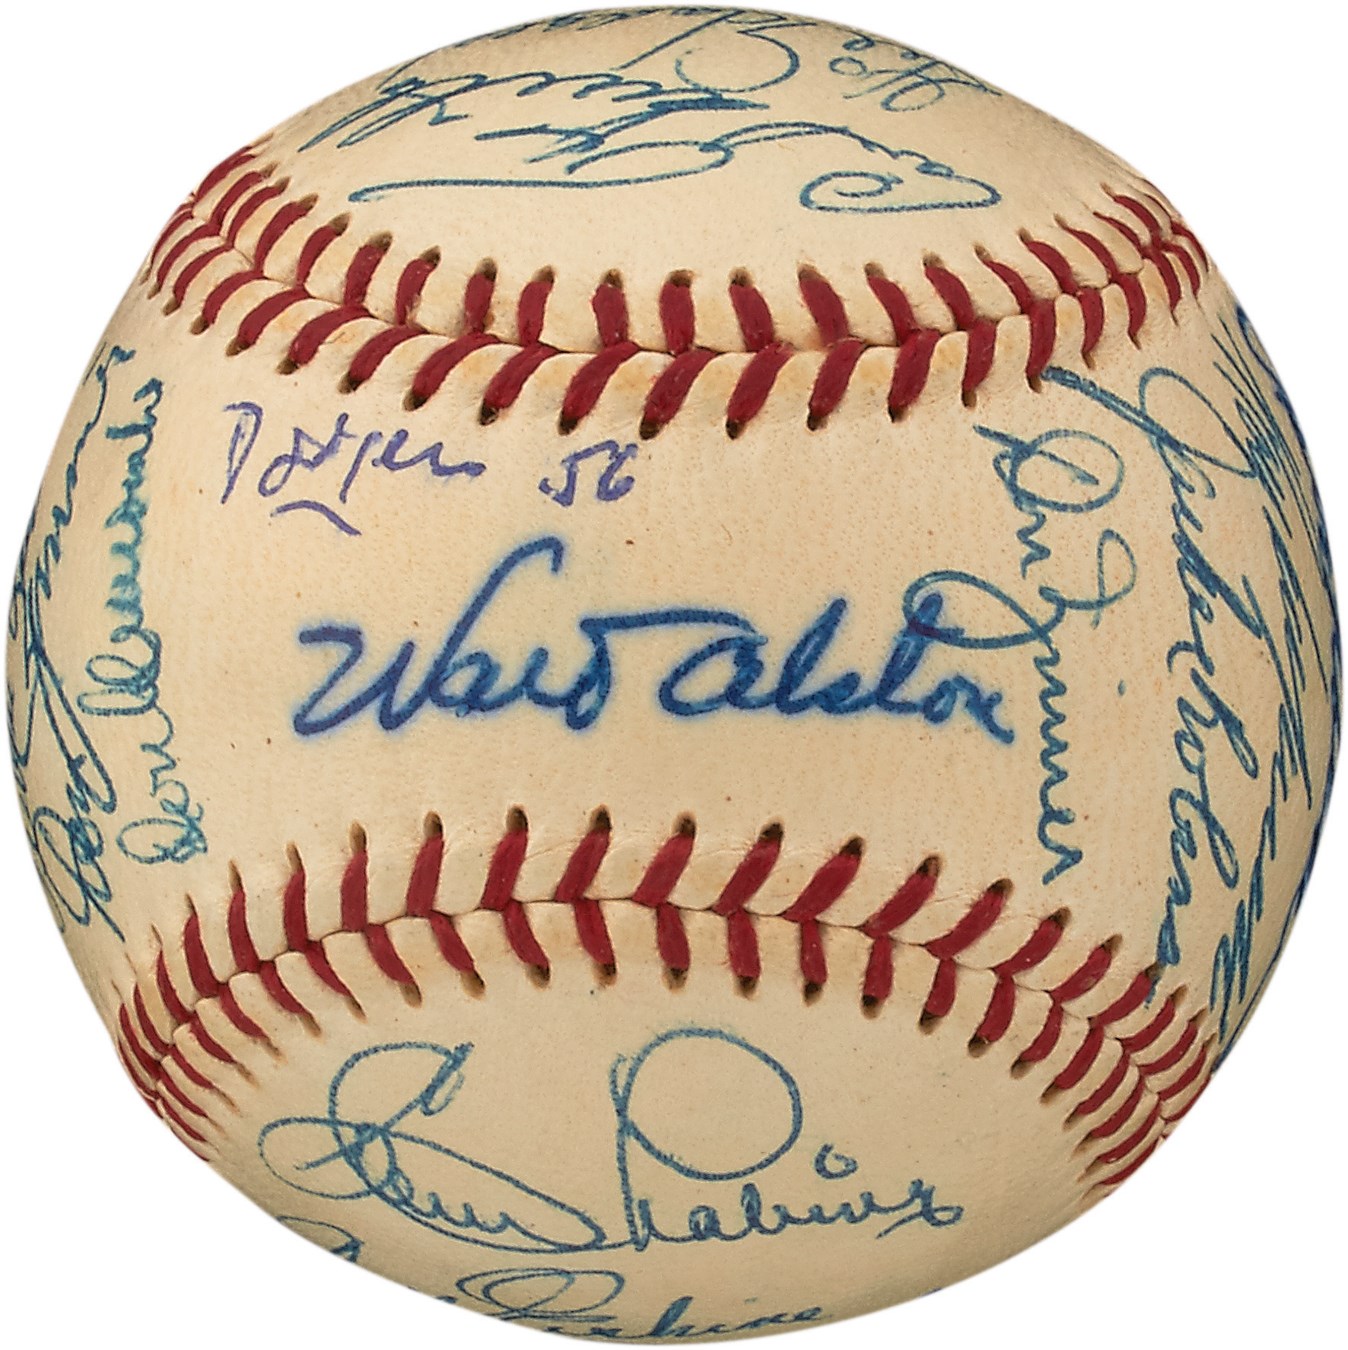 - High Grade 1956 Brooklyn Dodgers Team-Signed Baseball with Robinson & Campy (PSA/DNA)